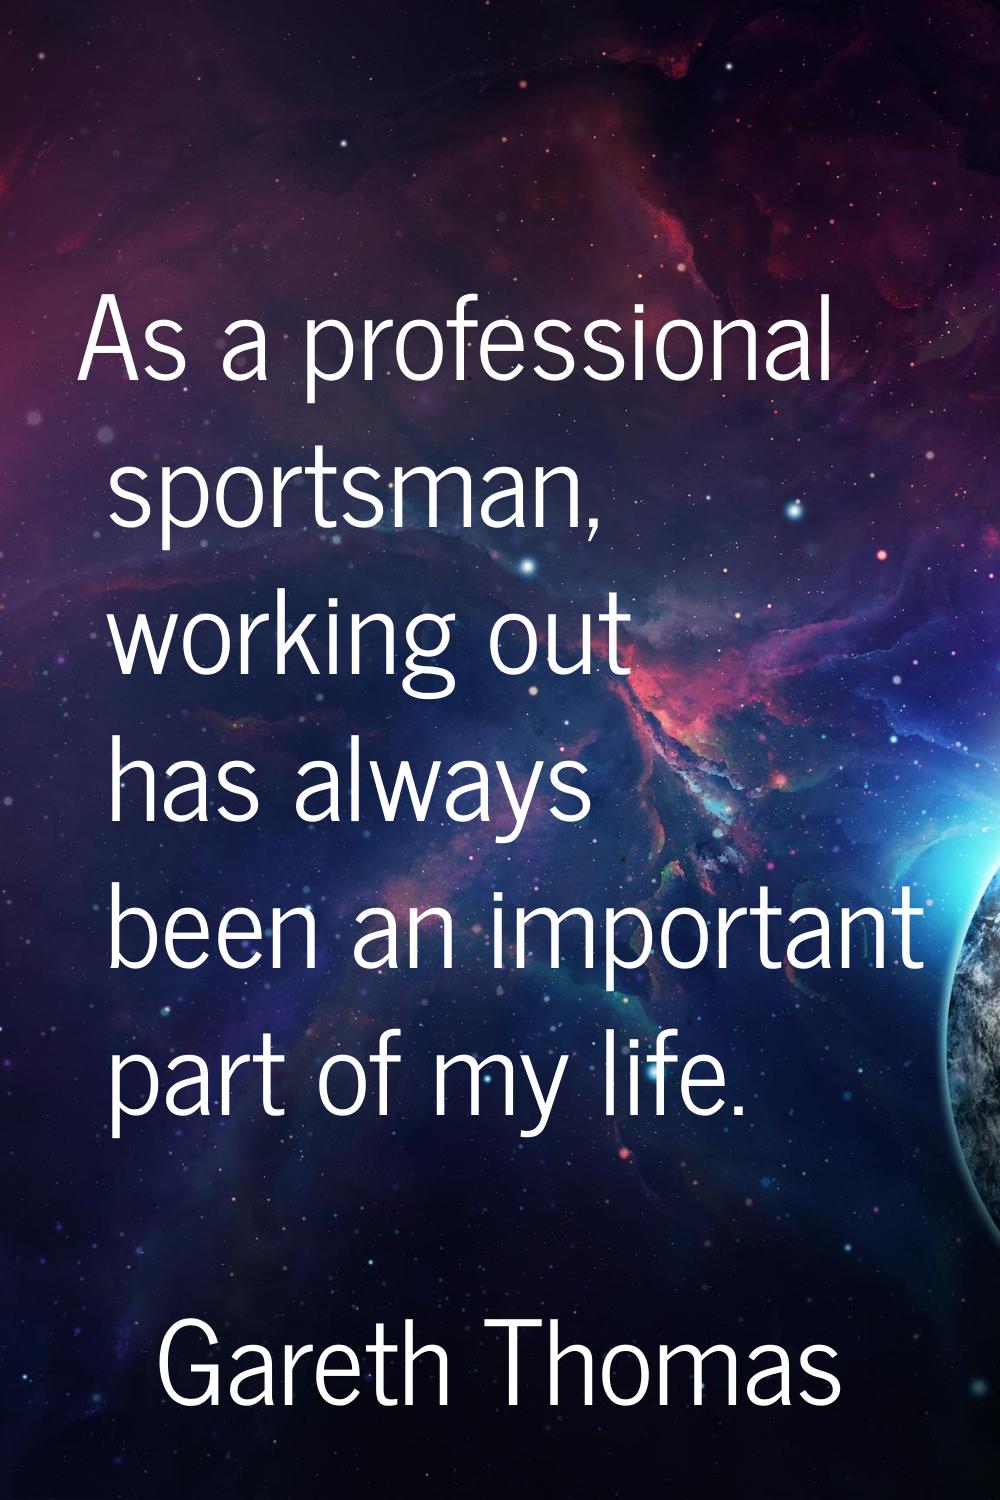 As a professional sportsman, working out has always been an important part of my life.